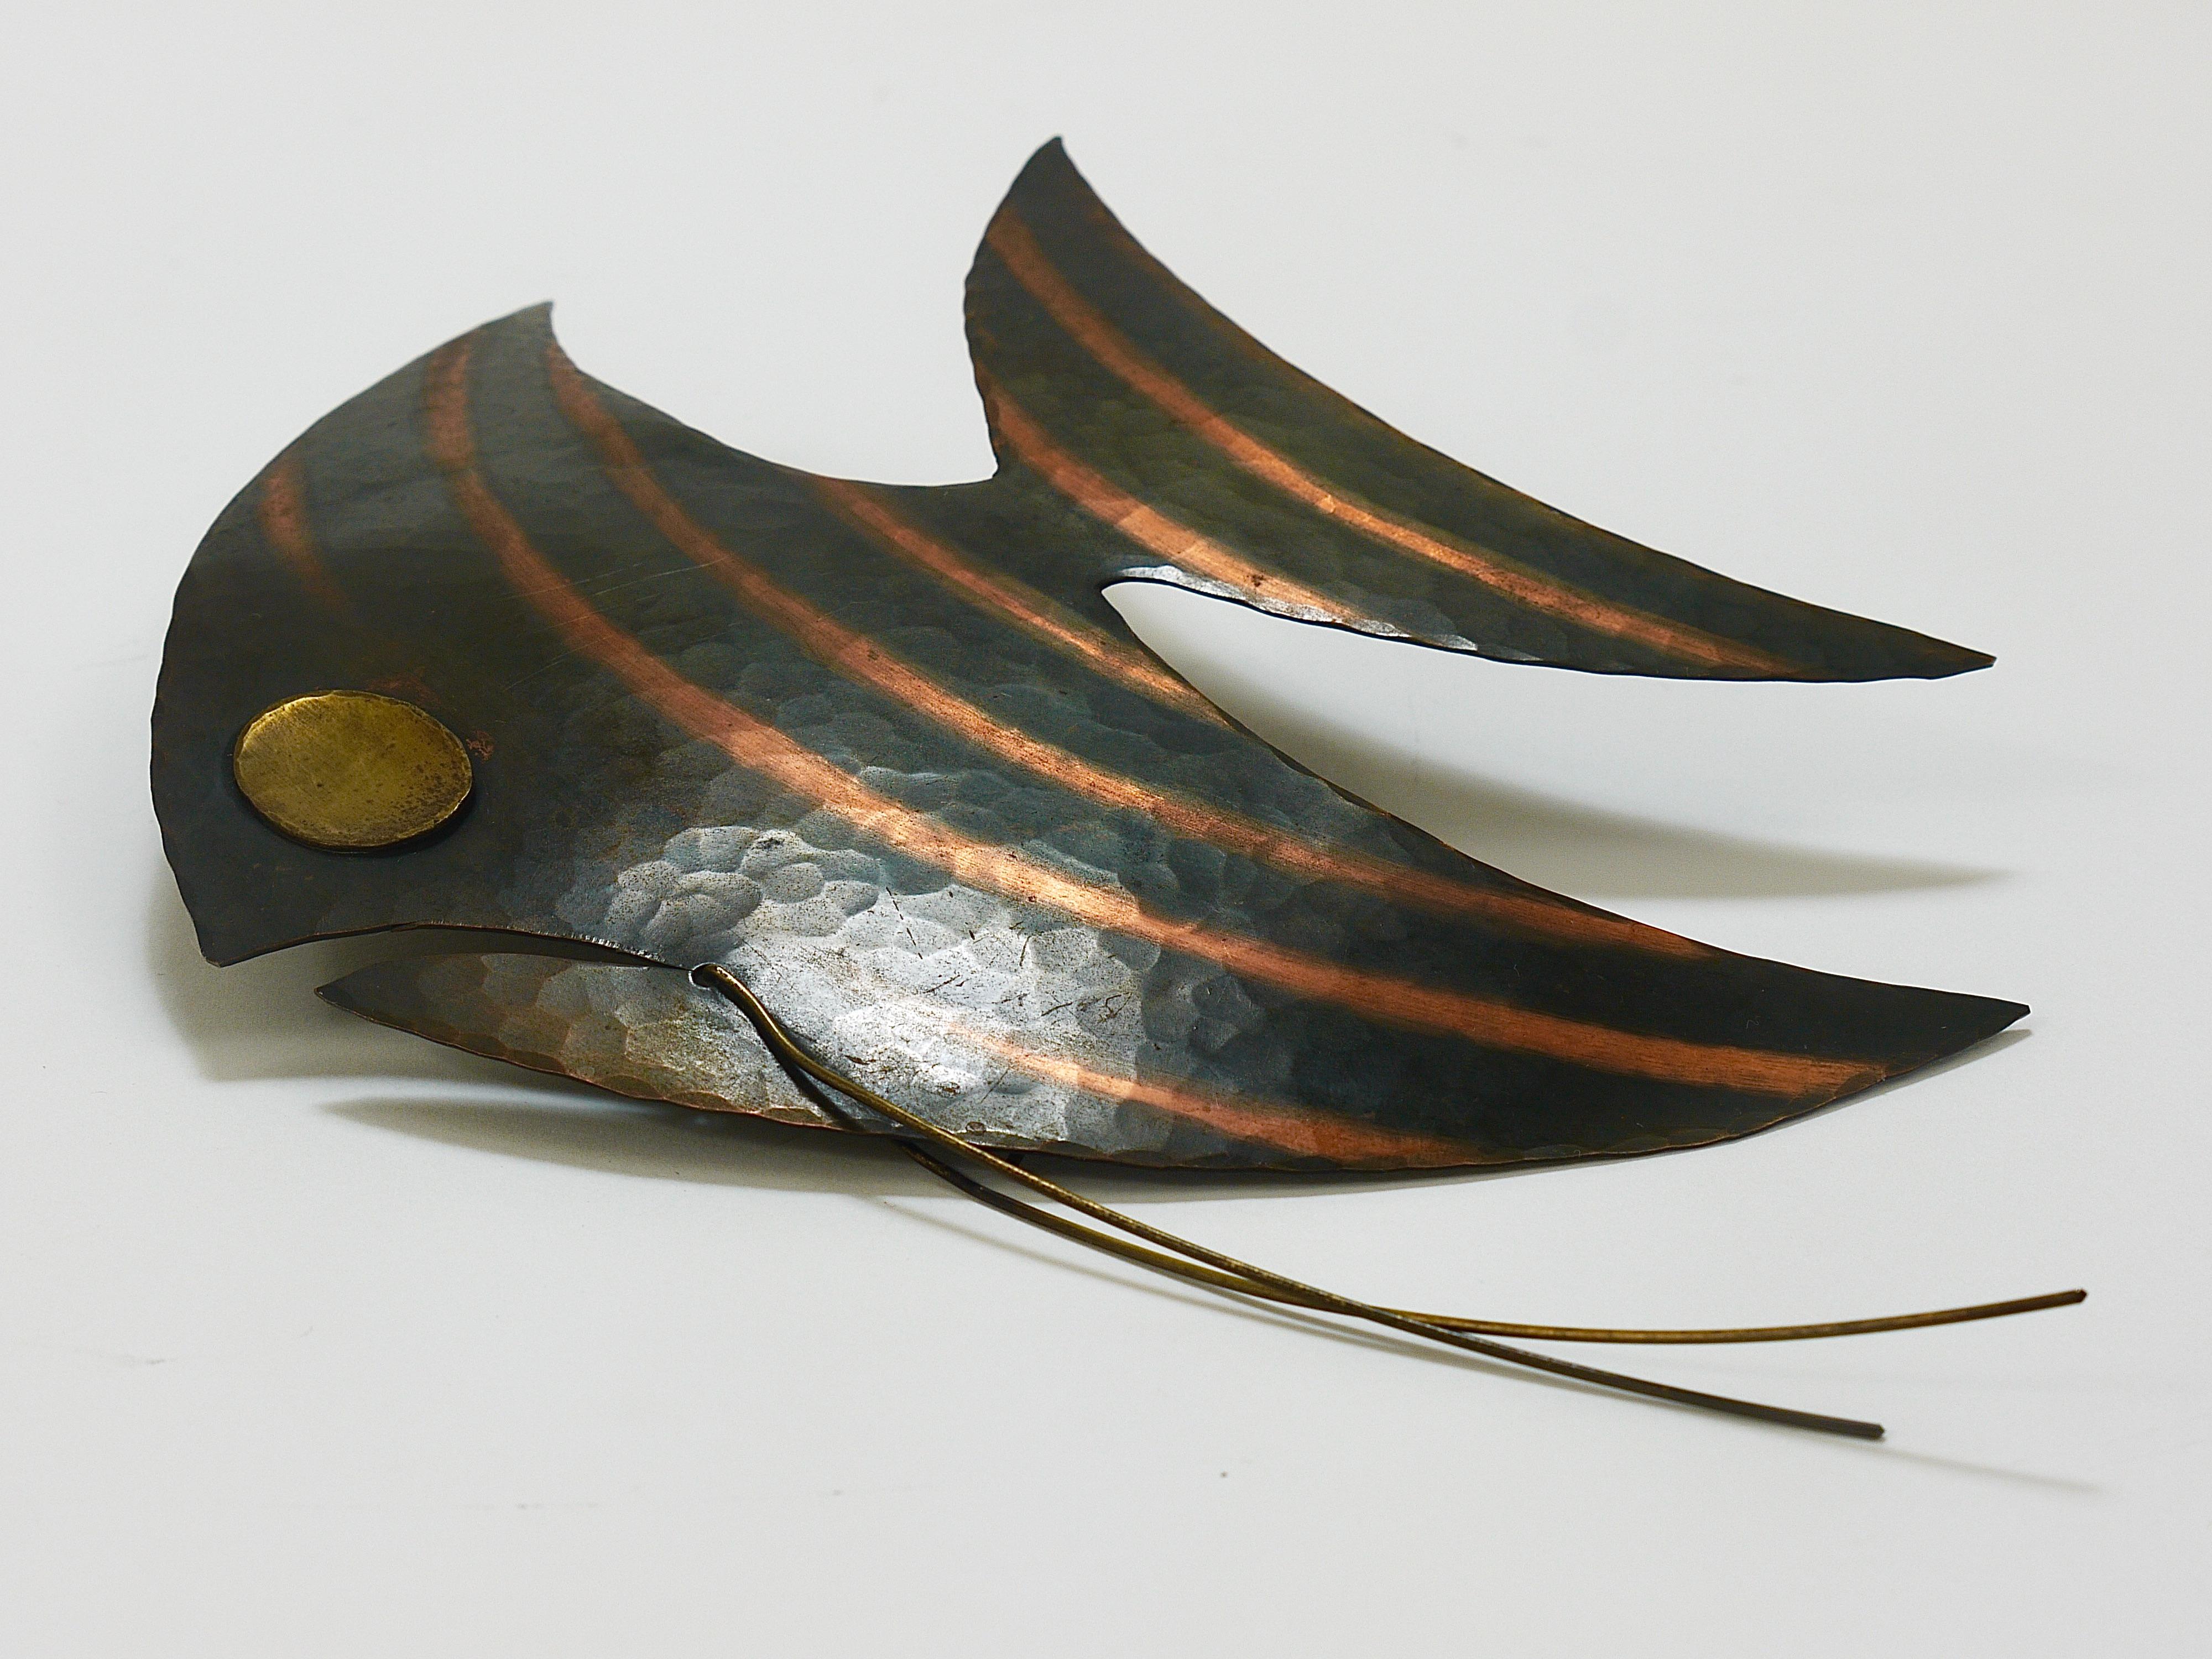 Midcentury Hammered Angel Fish Wall Plaque Sculpture, Copper, Austria, 1950s For Sale 4